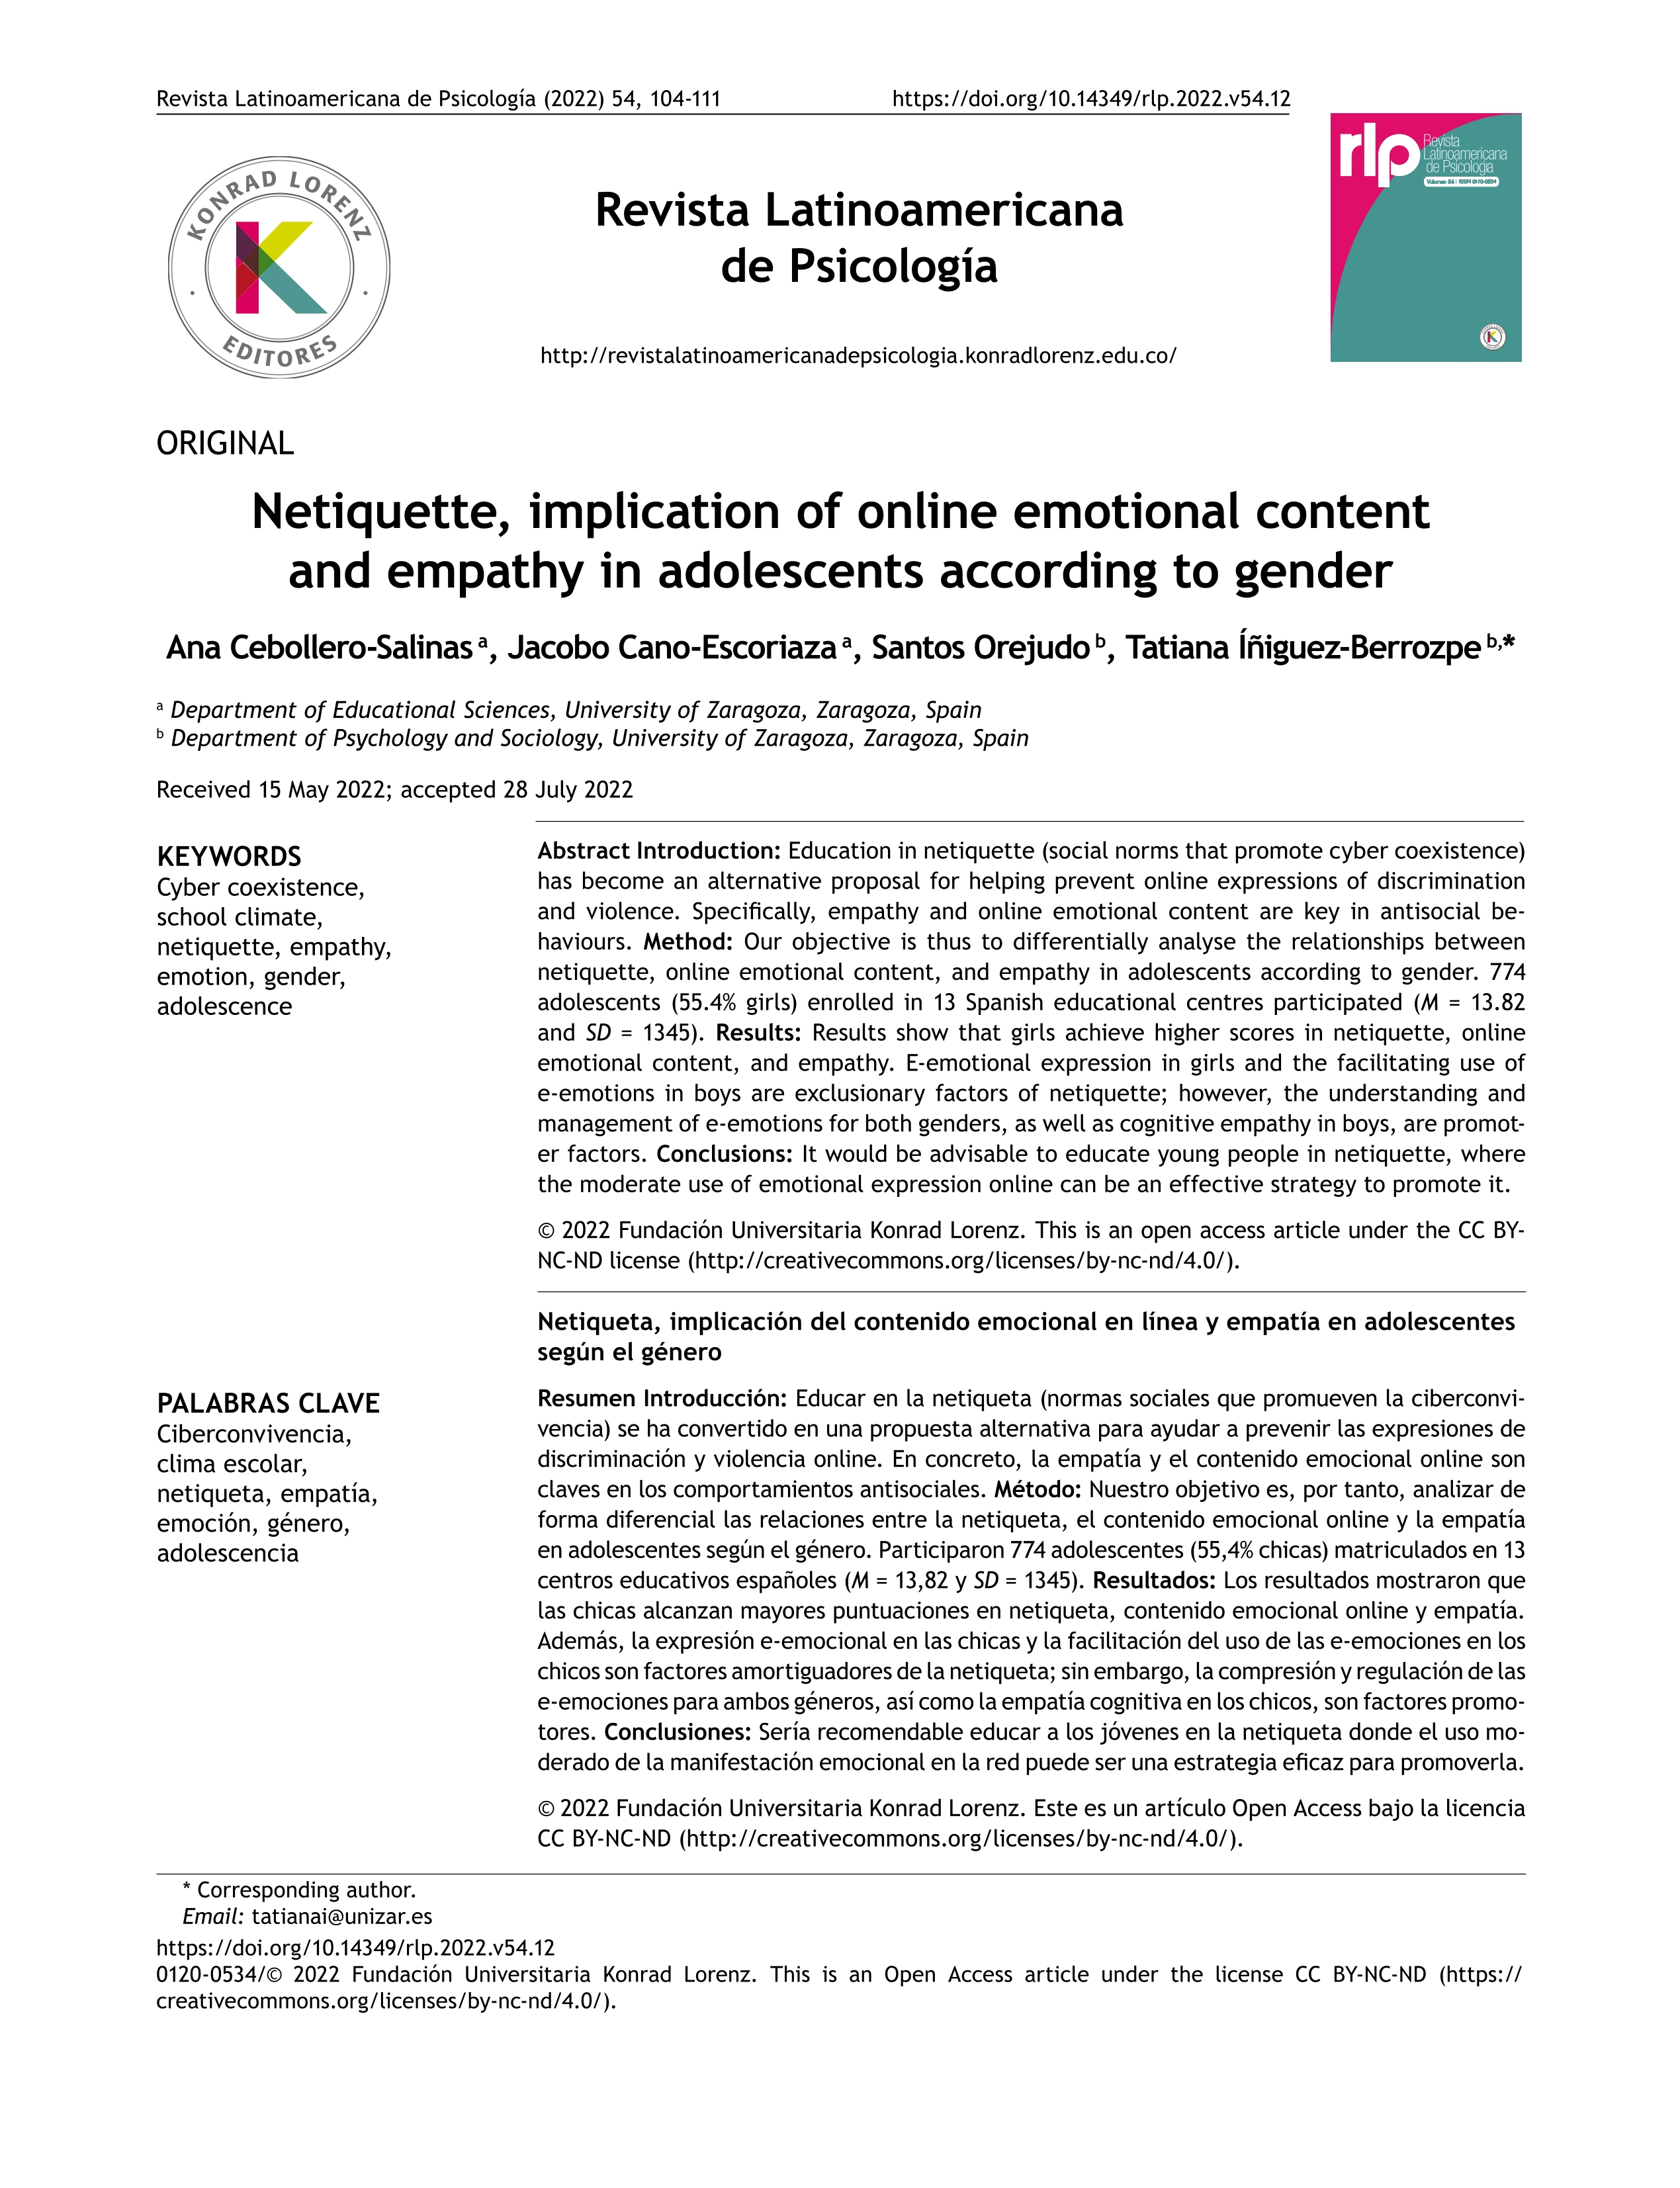 Netiquette, implication of online emotional content and empathy in adolescents according to gender